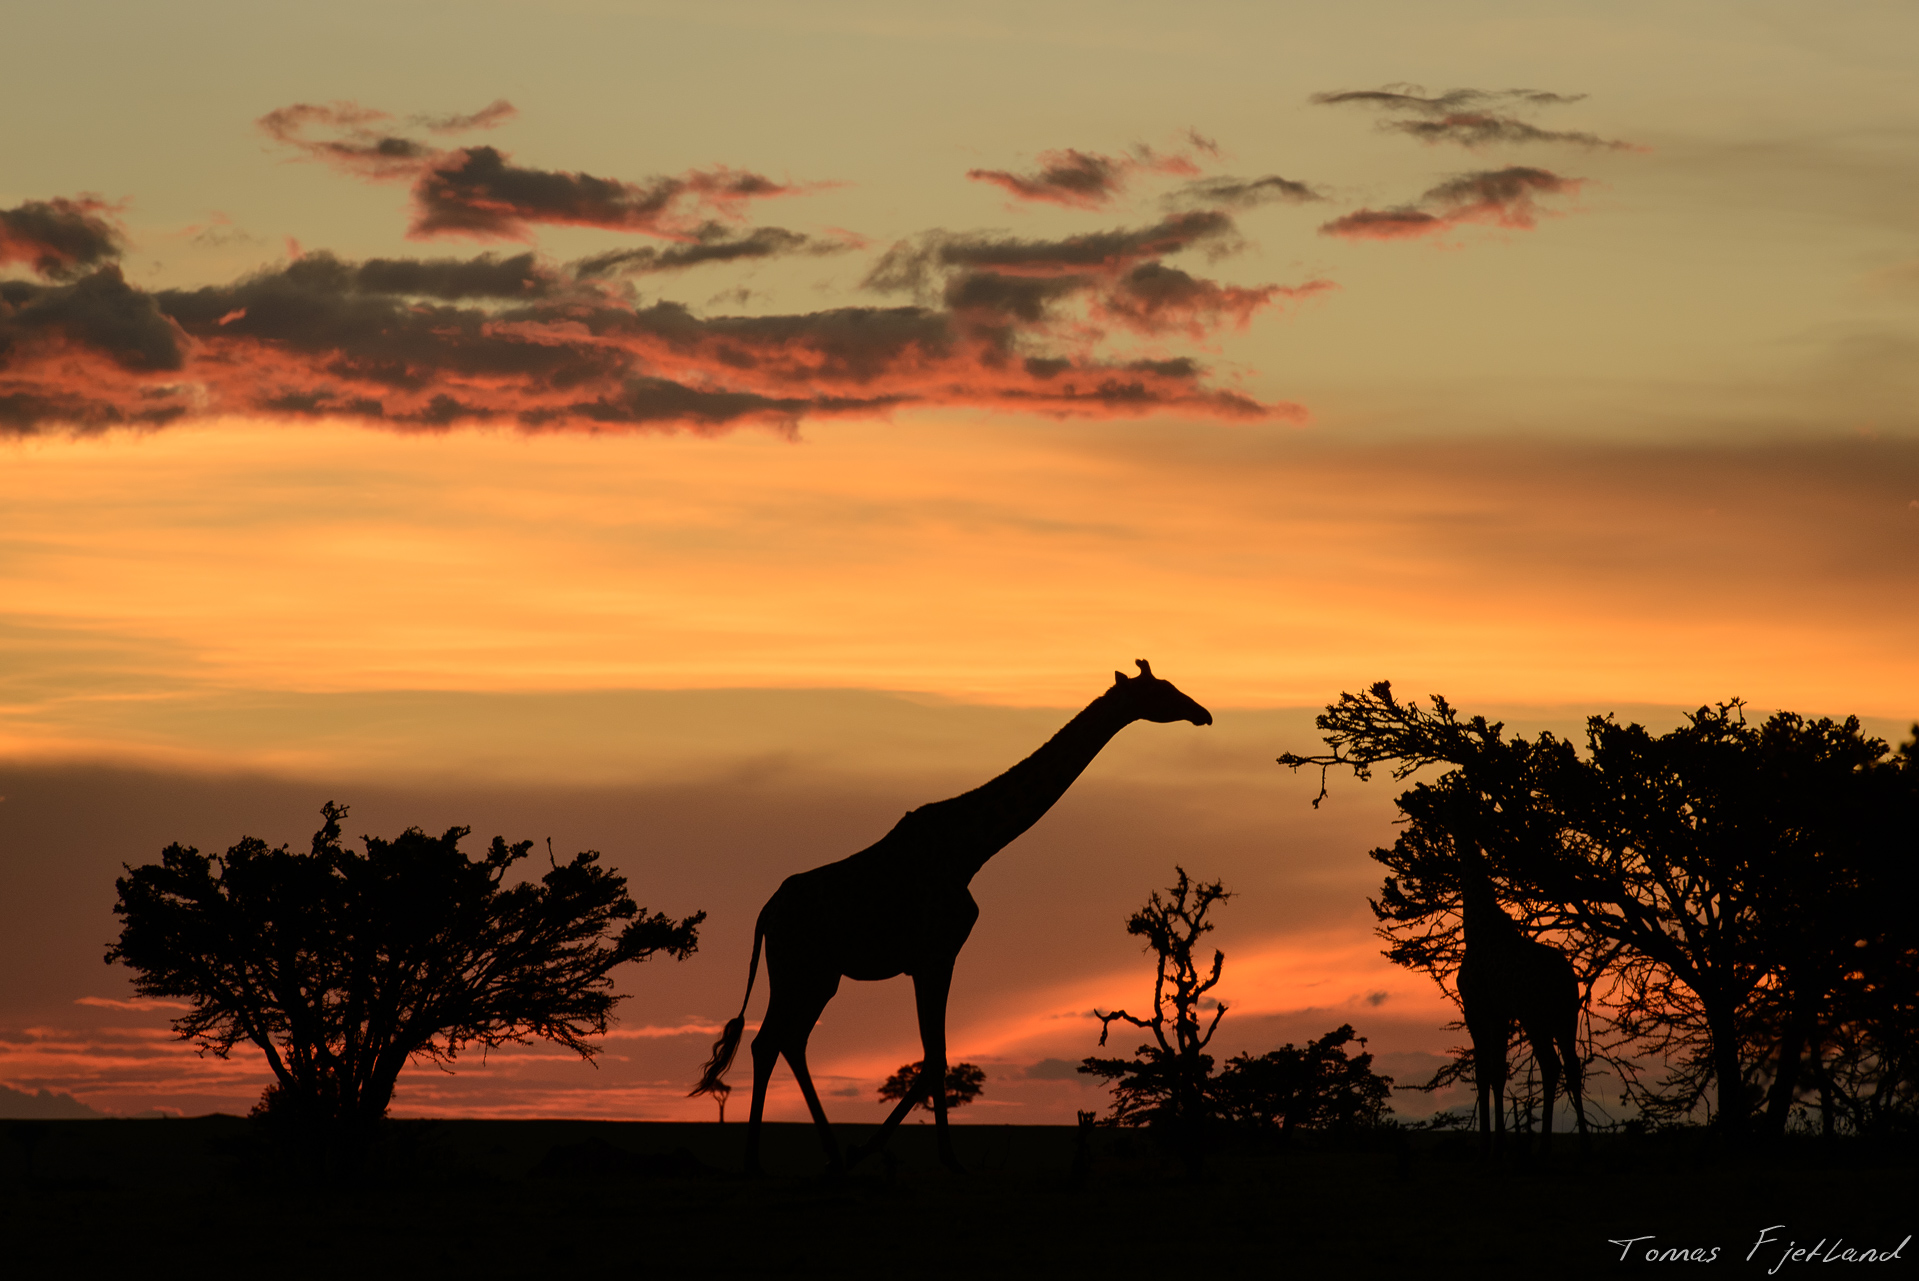 As the sun set, we came across a group of giraffes on a hill.